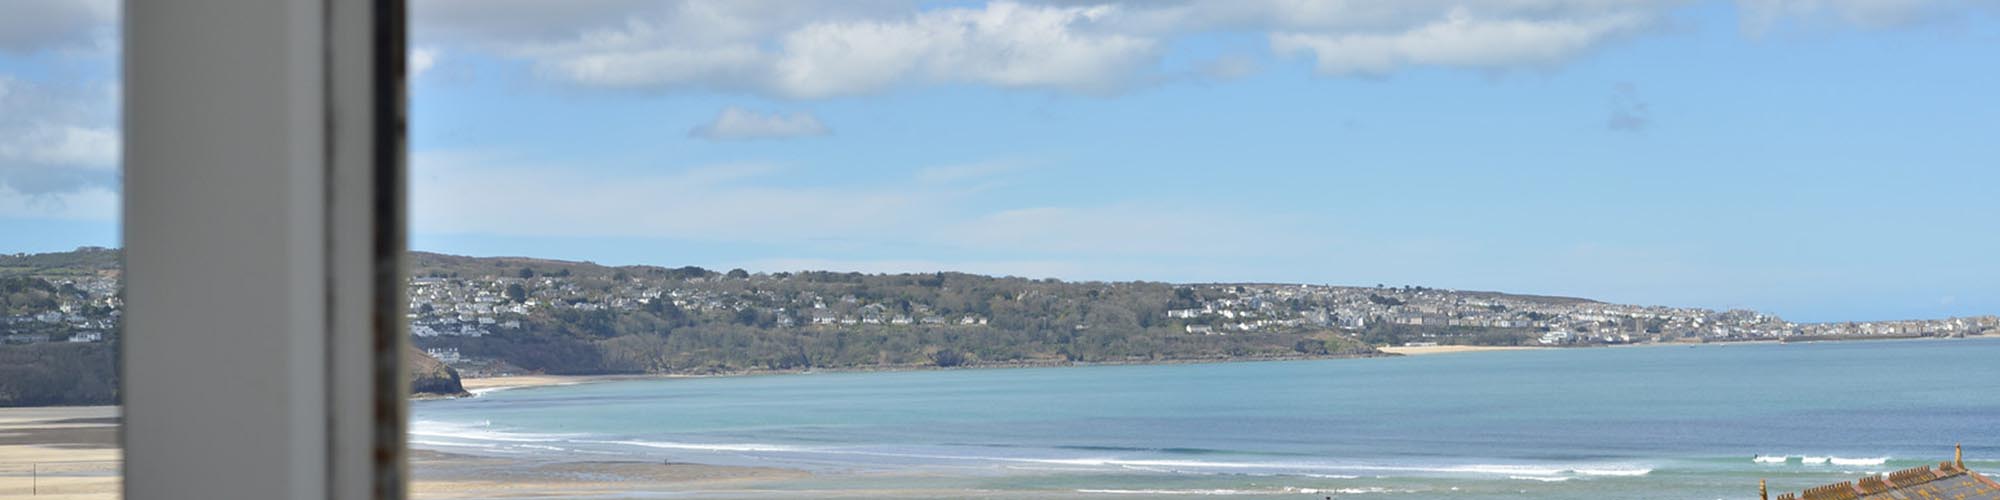 Self Catering Portreath - Chymoresk